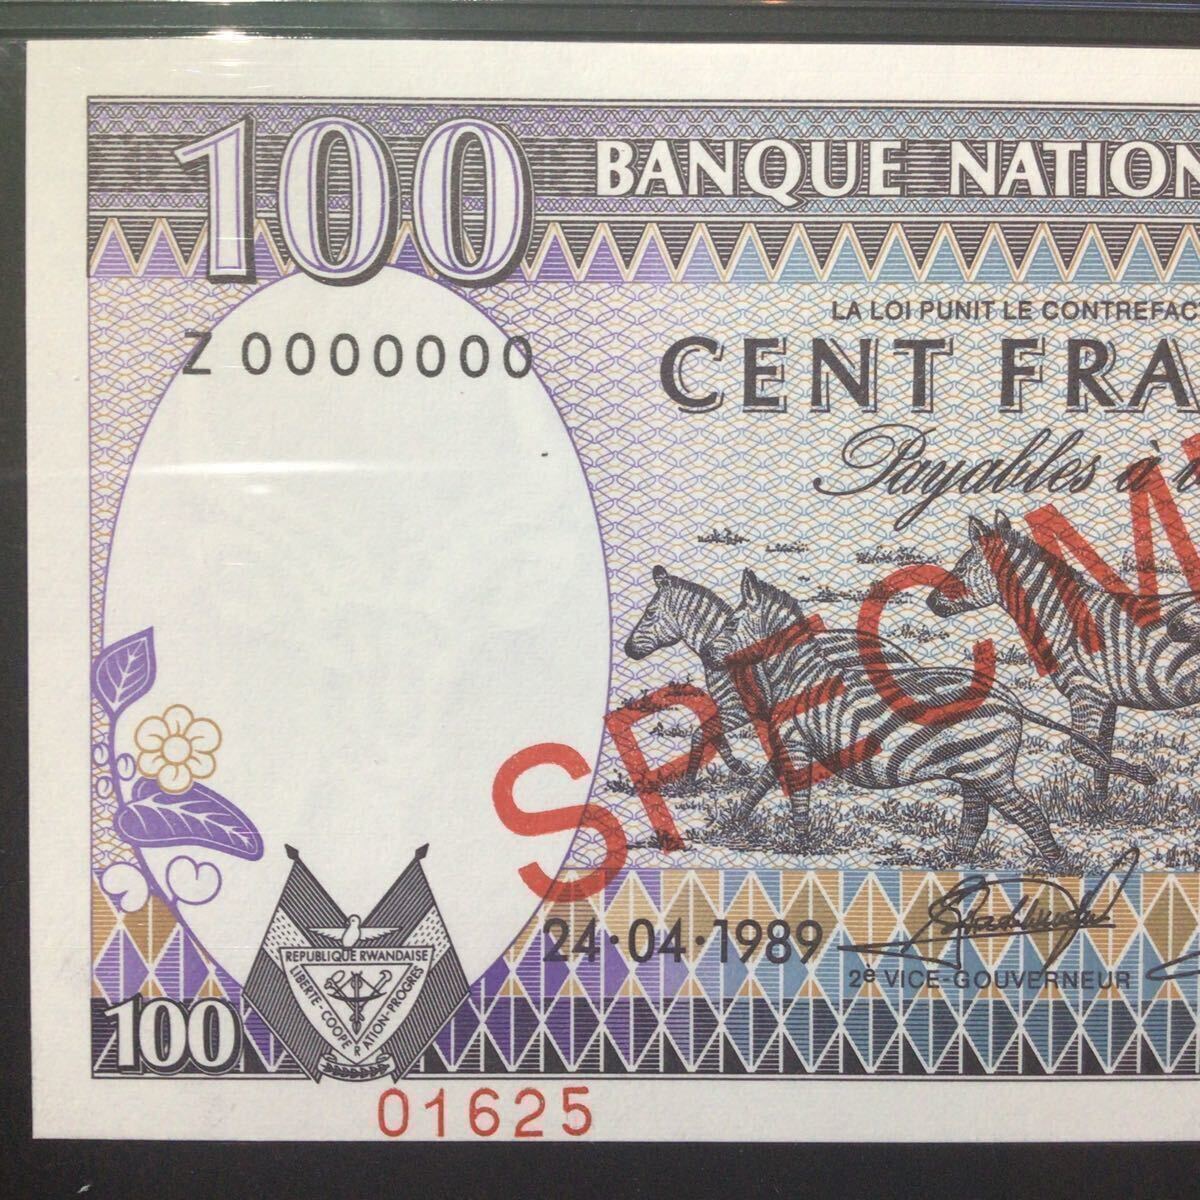 World Banknote Grading RWANDA《Banque Nationale》100 Escudos〔SPECIMEN〕【1989】『PMG Grading Choice About Uncirculated 58 EPQ』_画像4